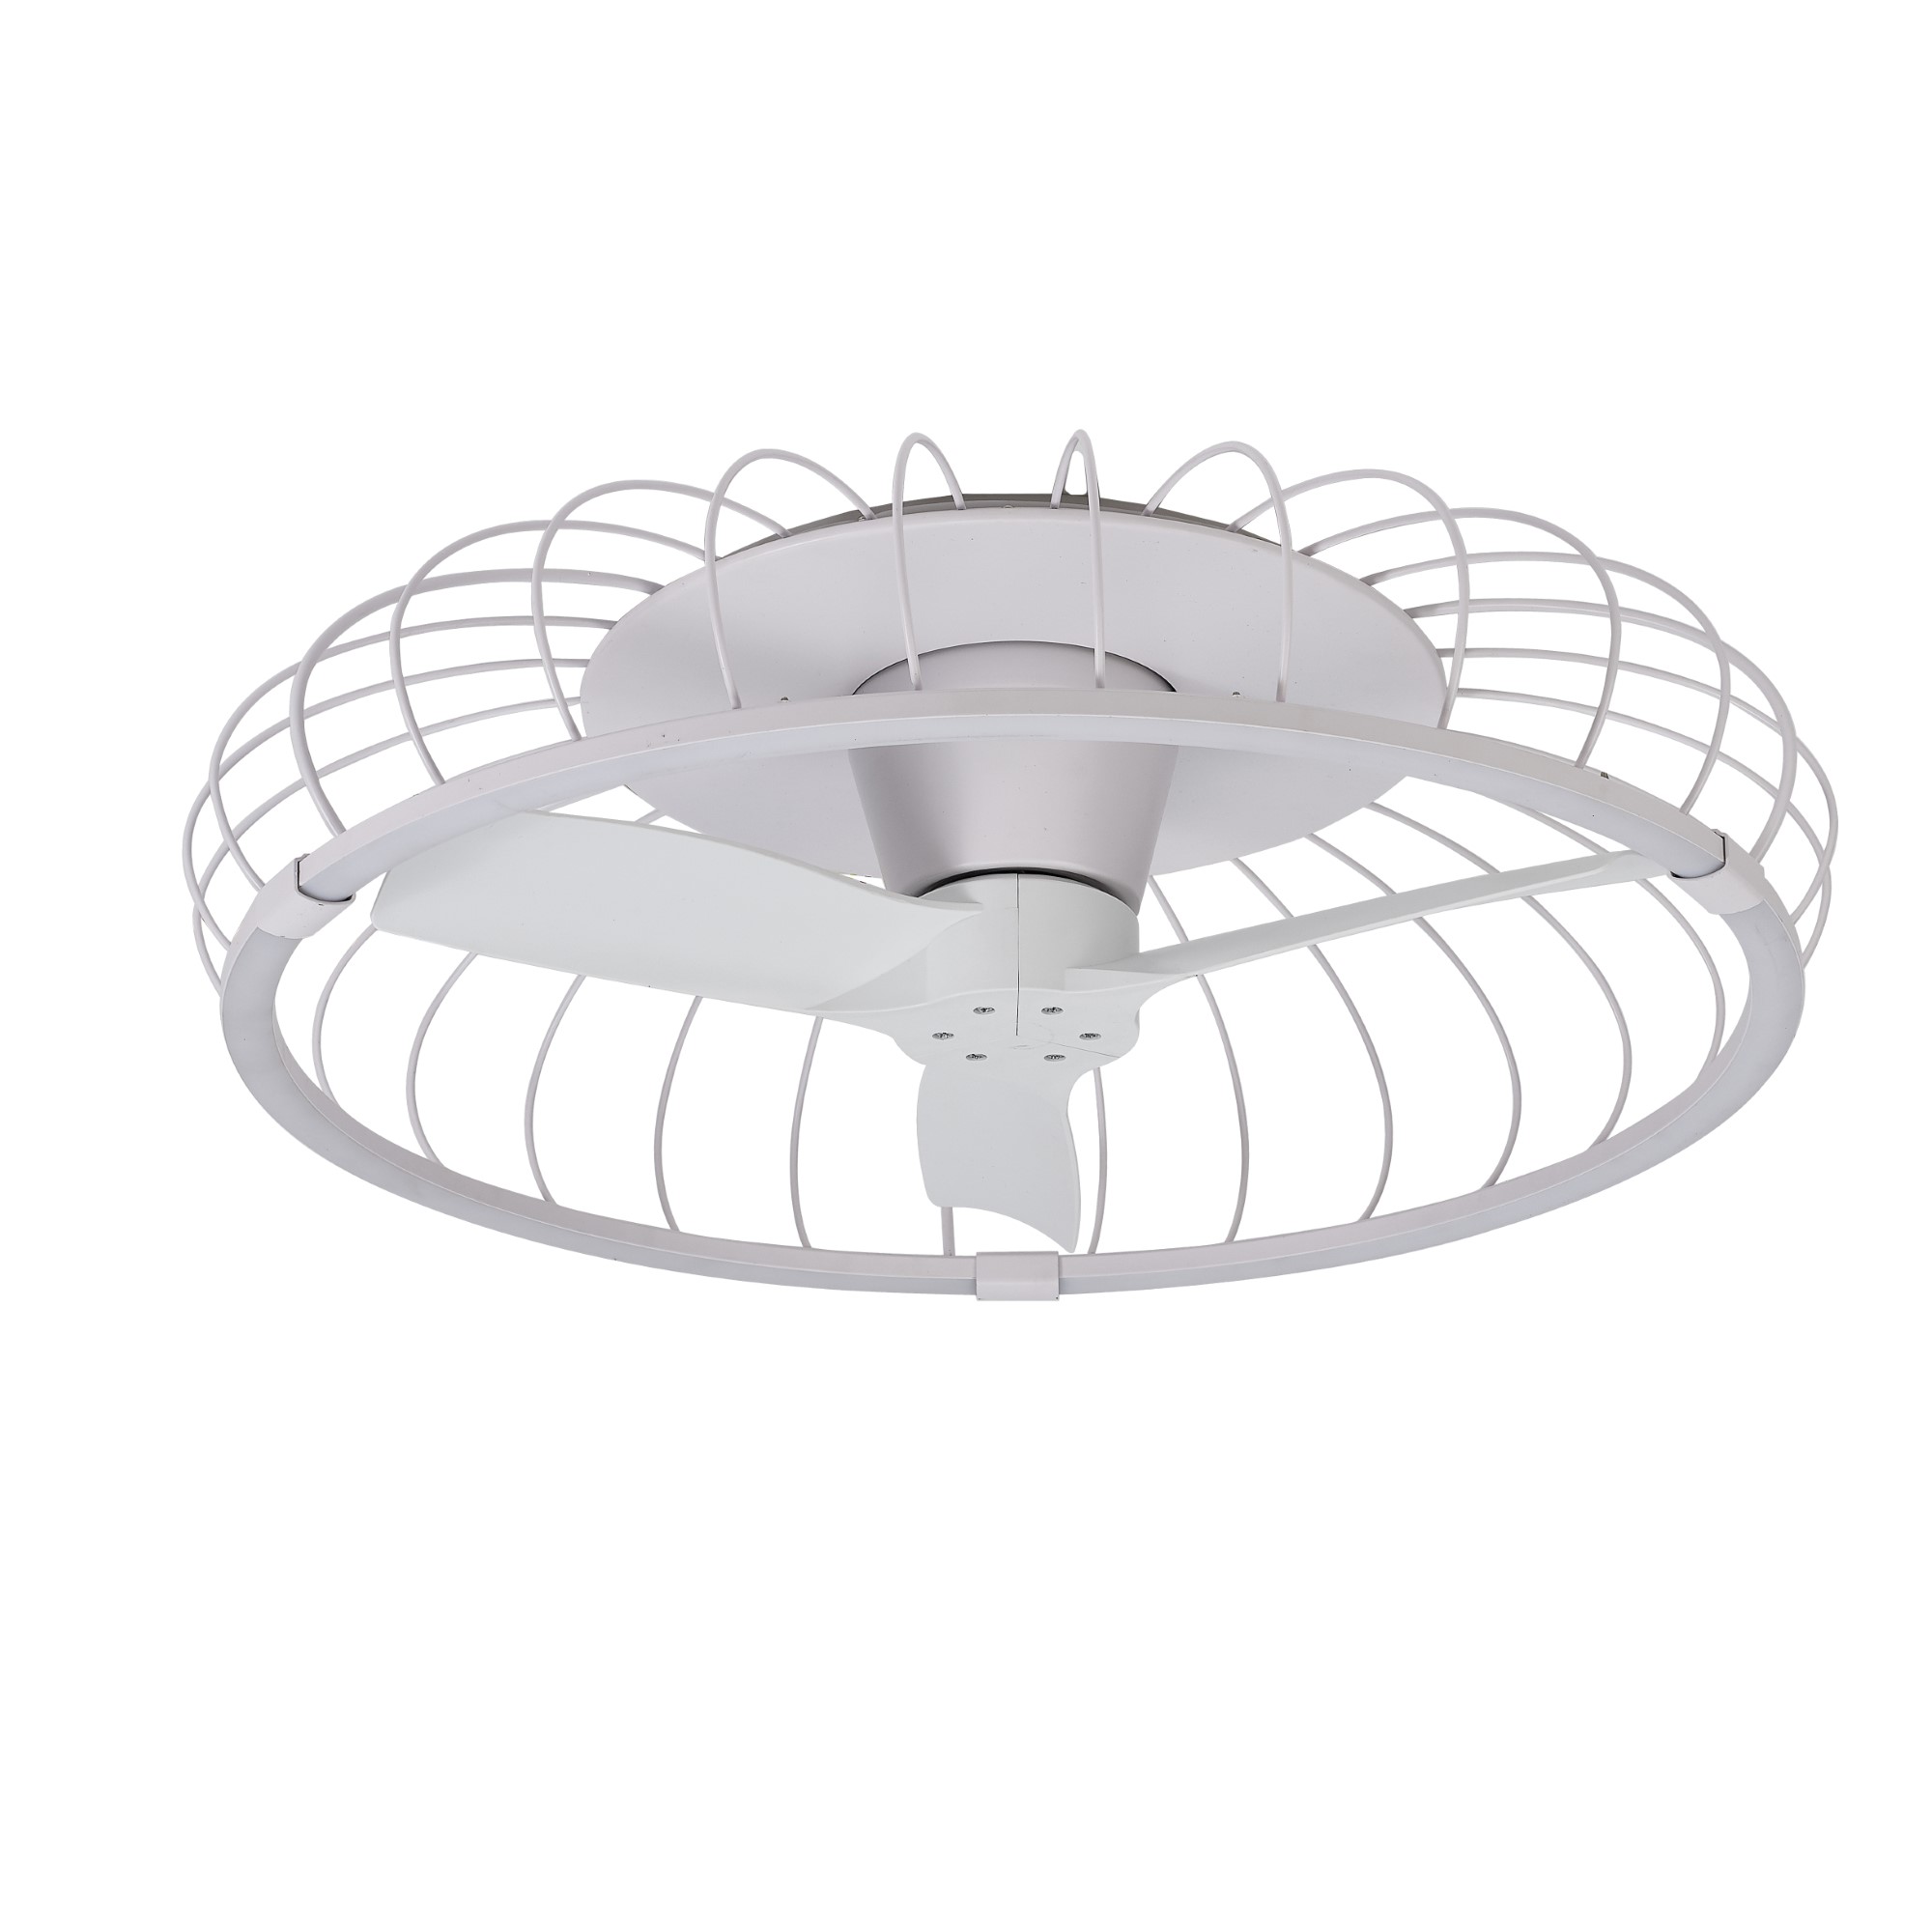 M7807  Nature 75W LED Dimmable Ceiling Light & Fan; Remote / APP / Voice Controlled White